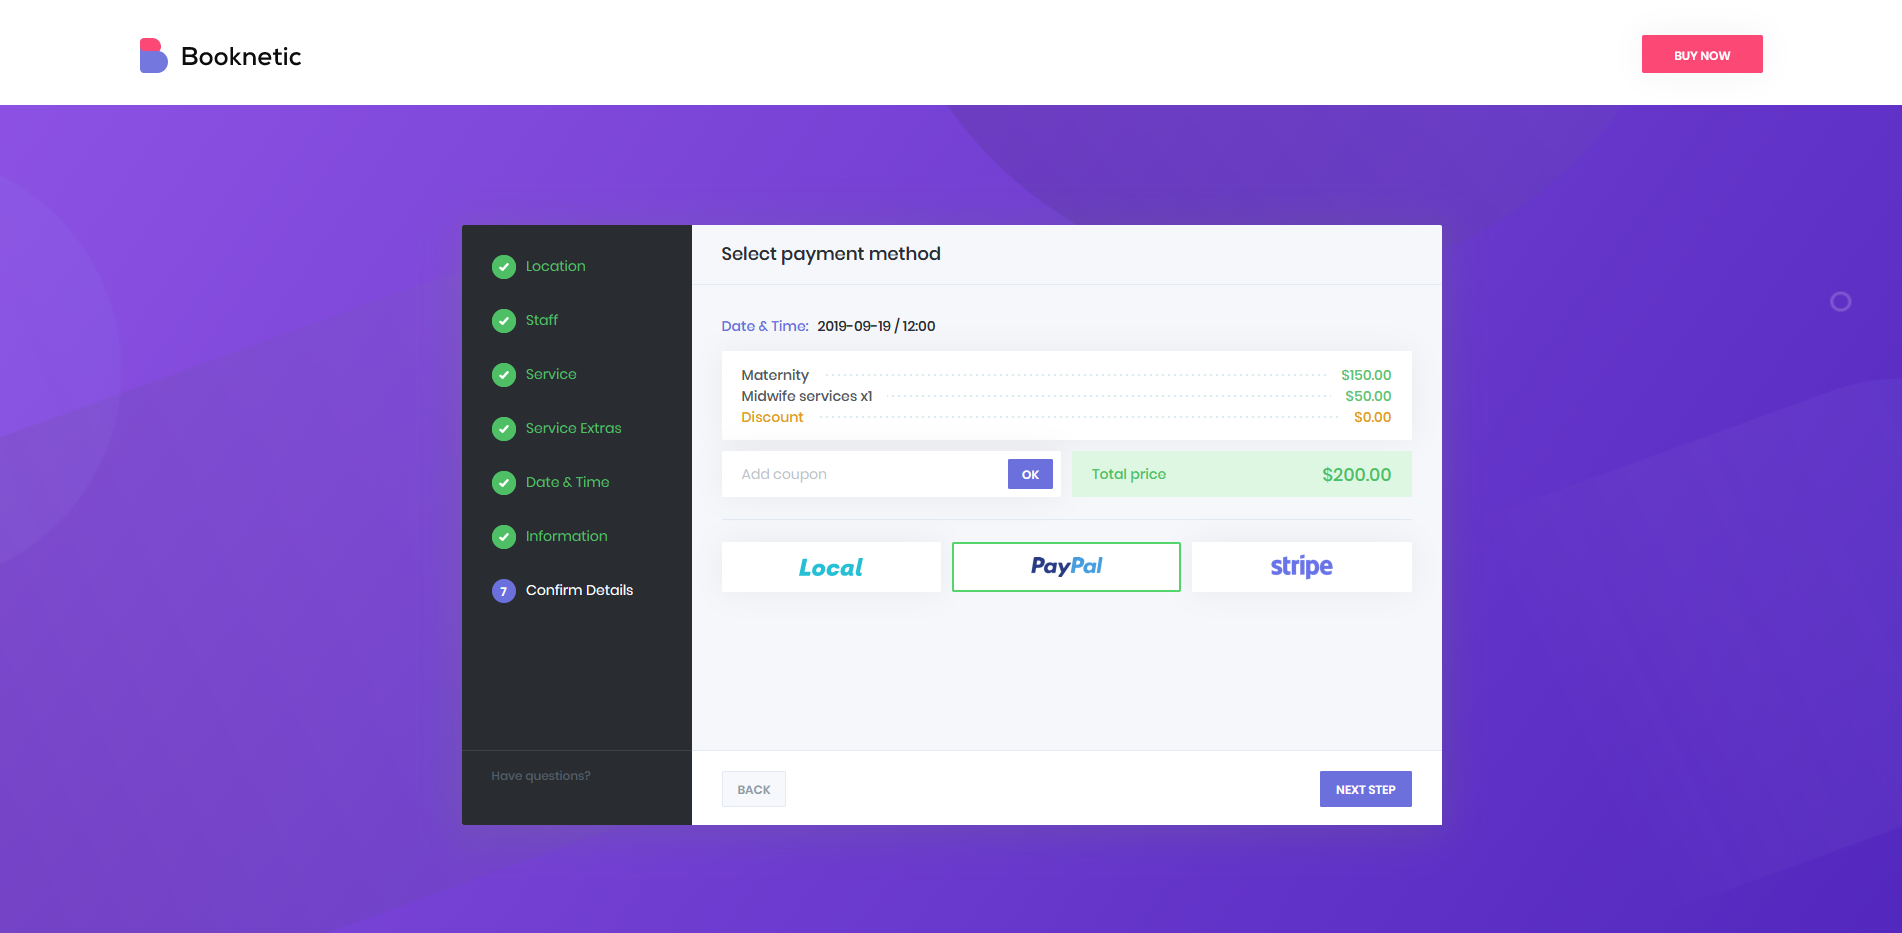 Booknetic - PayPal, Stripe, Local payment methods